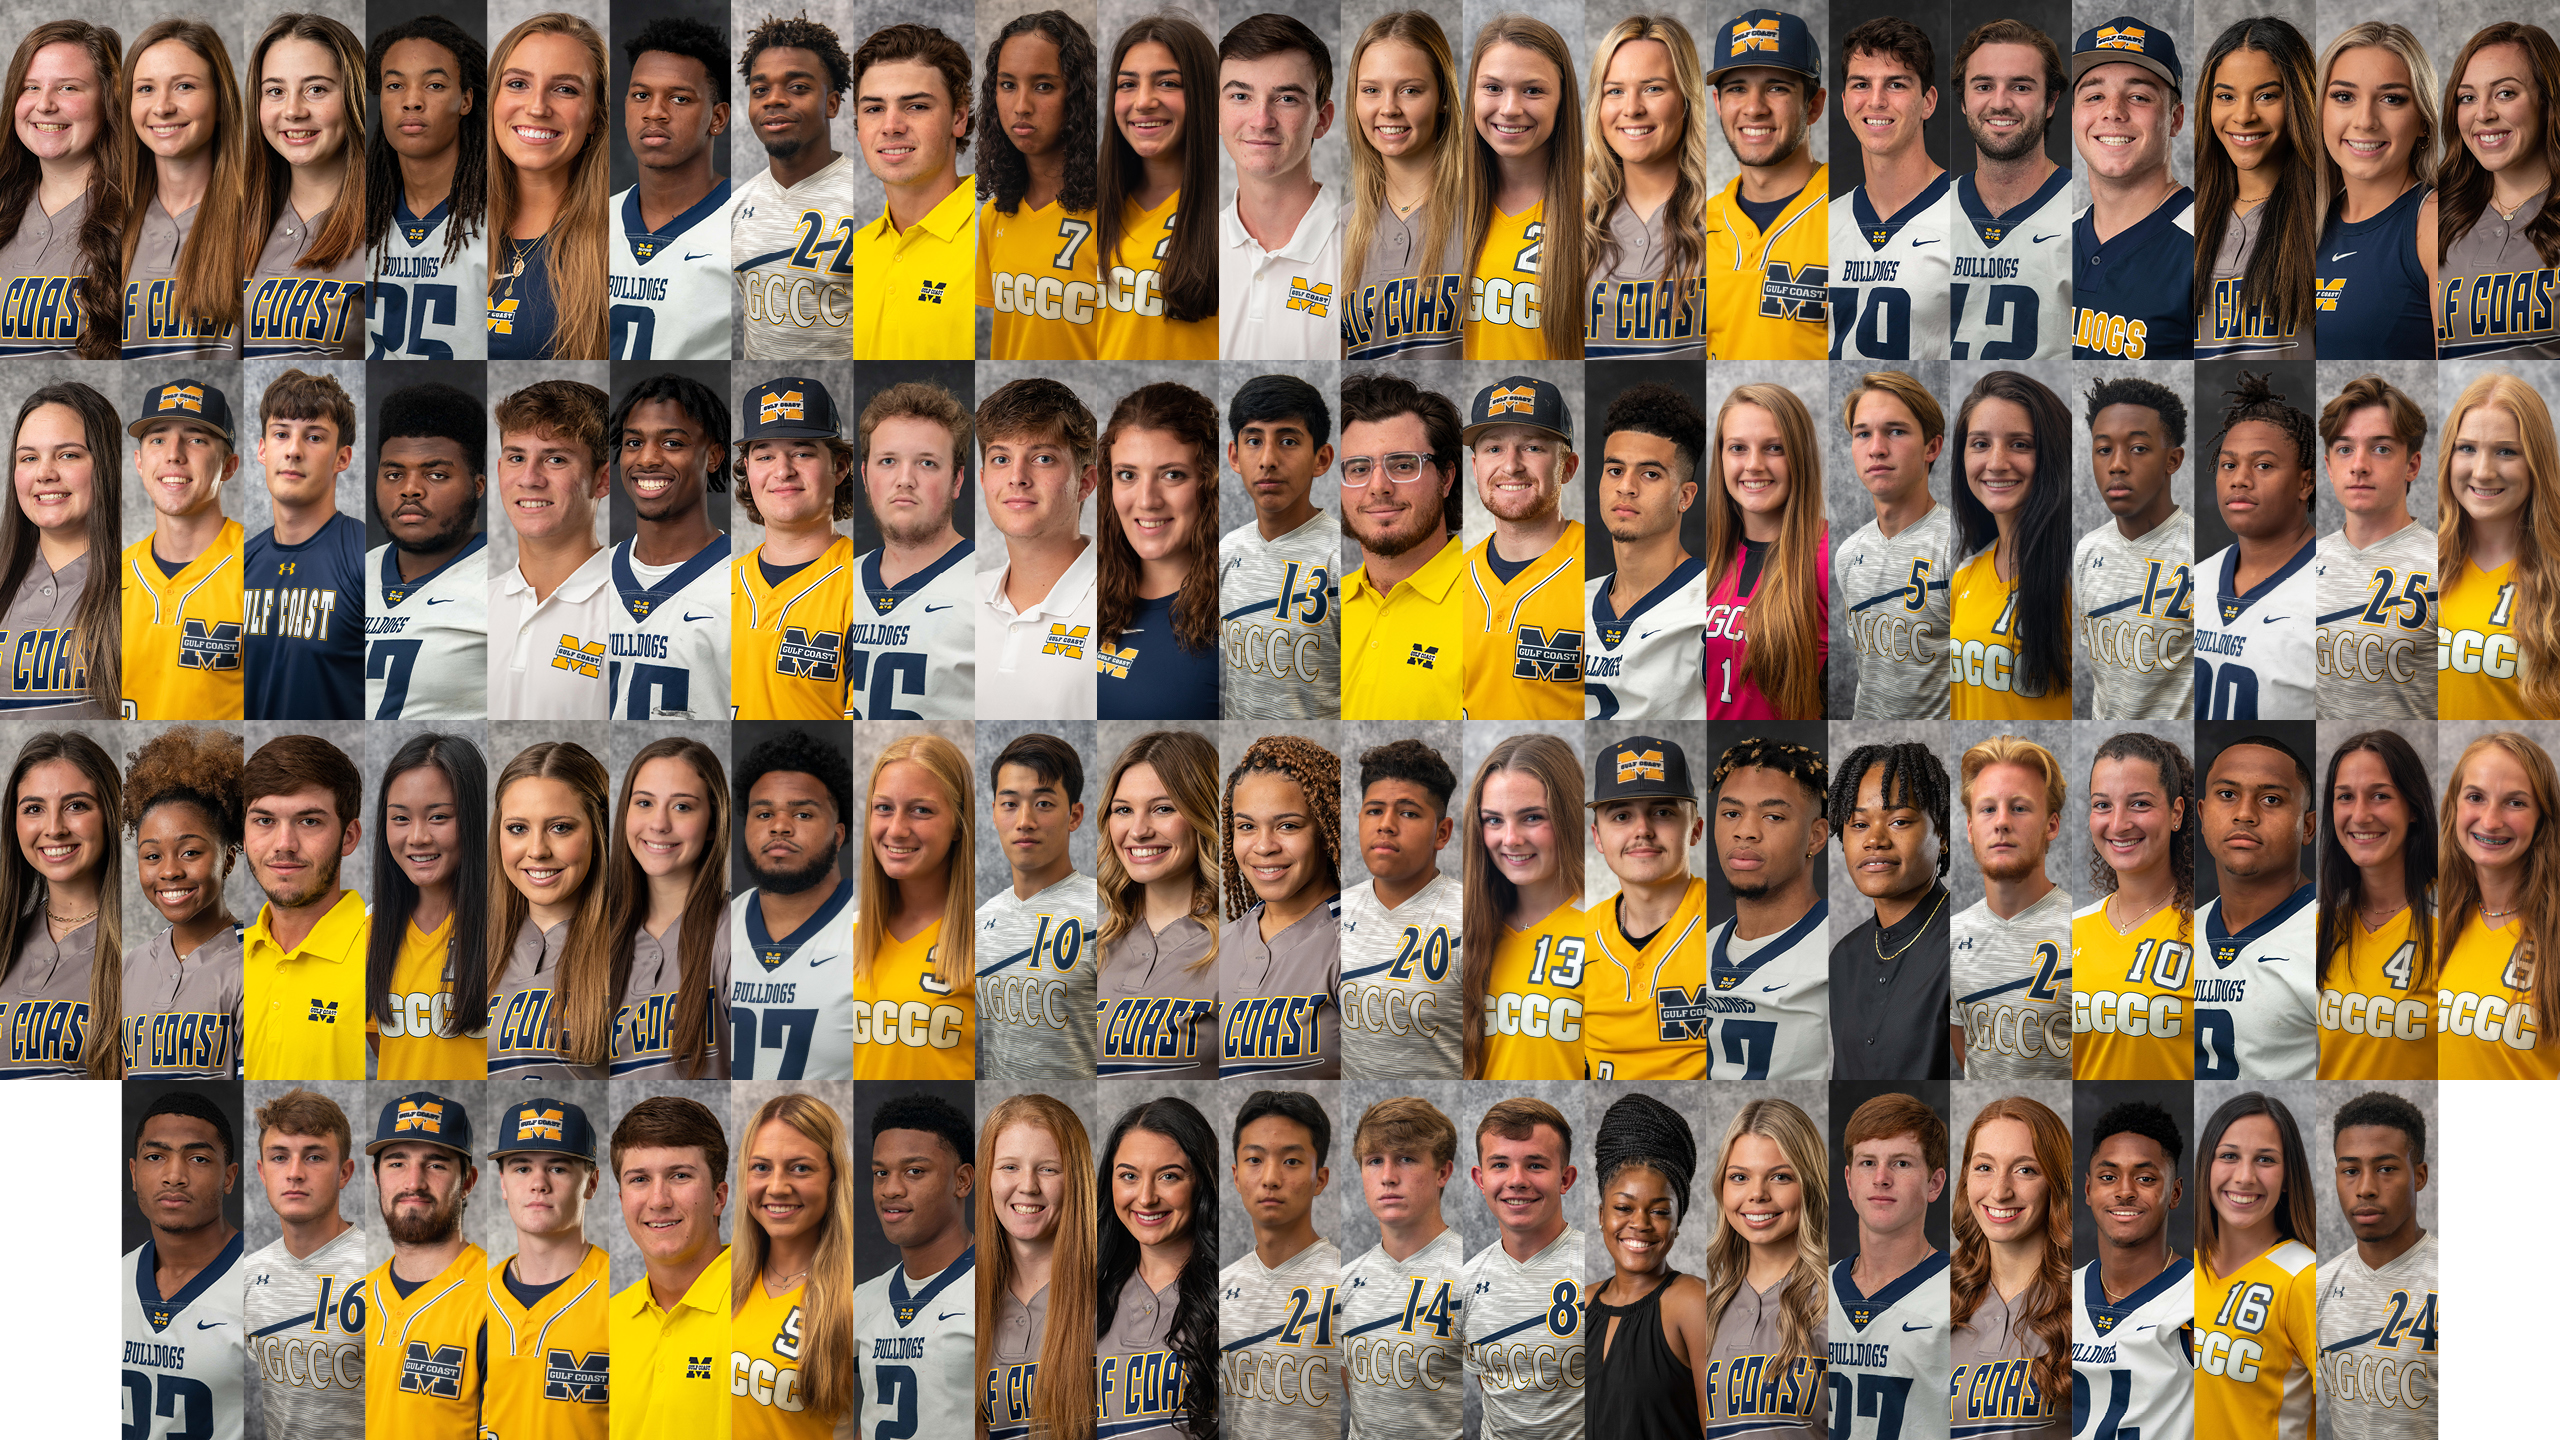 Gulf Coast leads MACCC with 82 NJCAA All-Academic student-athletes